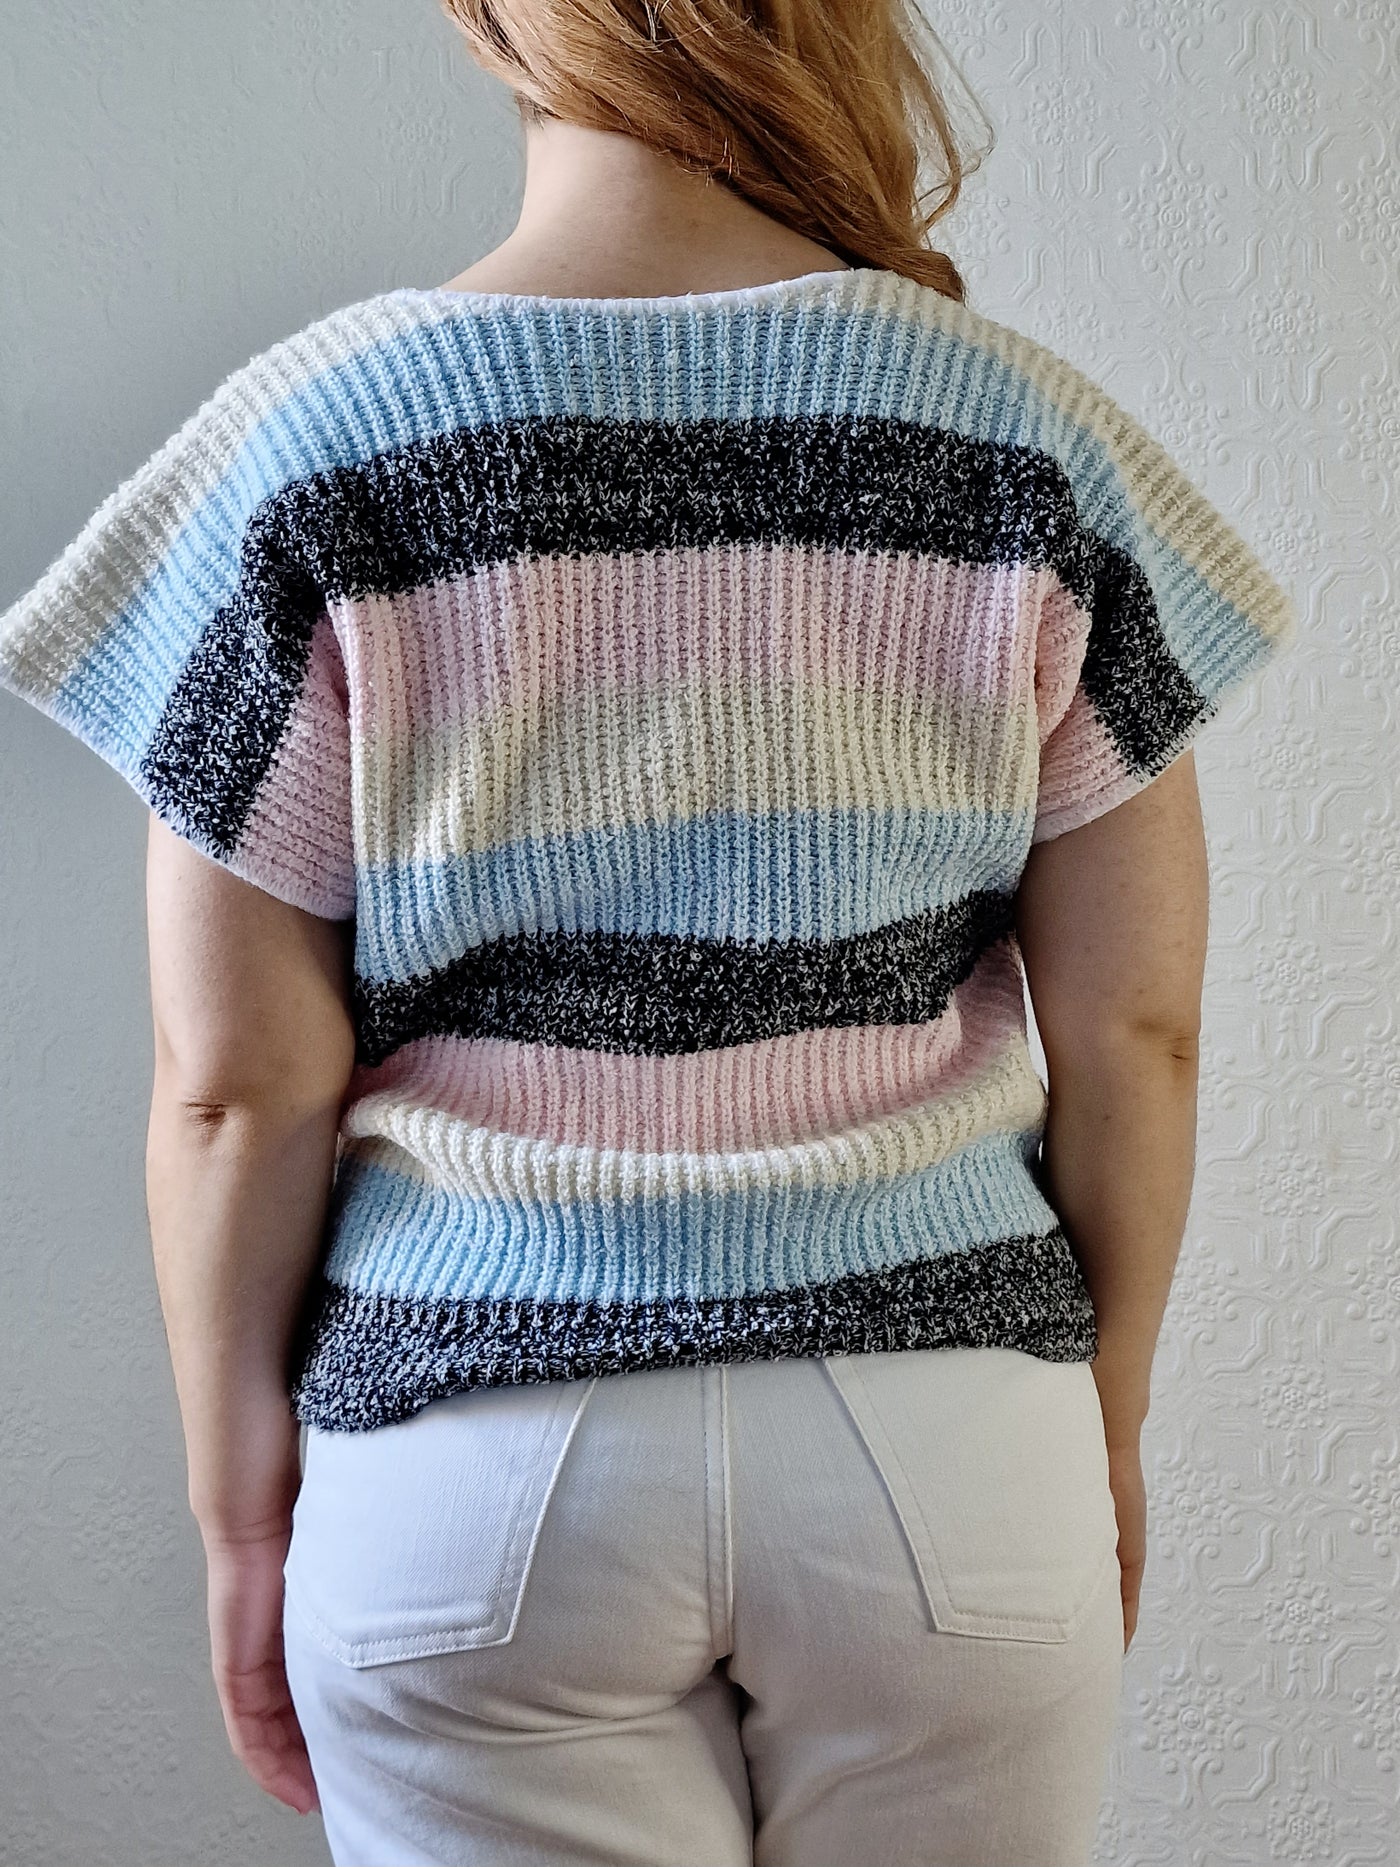 Vintage 80s Striped Pastel V-Neck Knitted Jumper Top with Short Sleeves - M